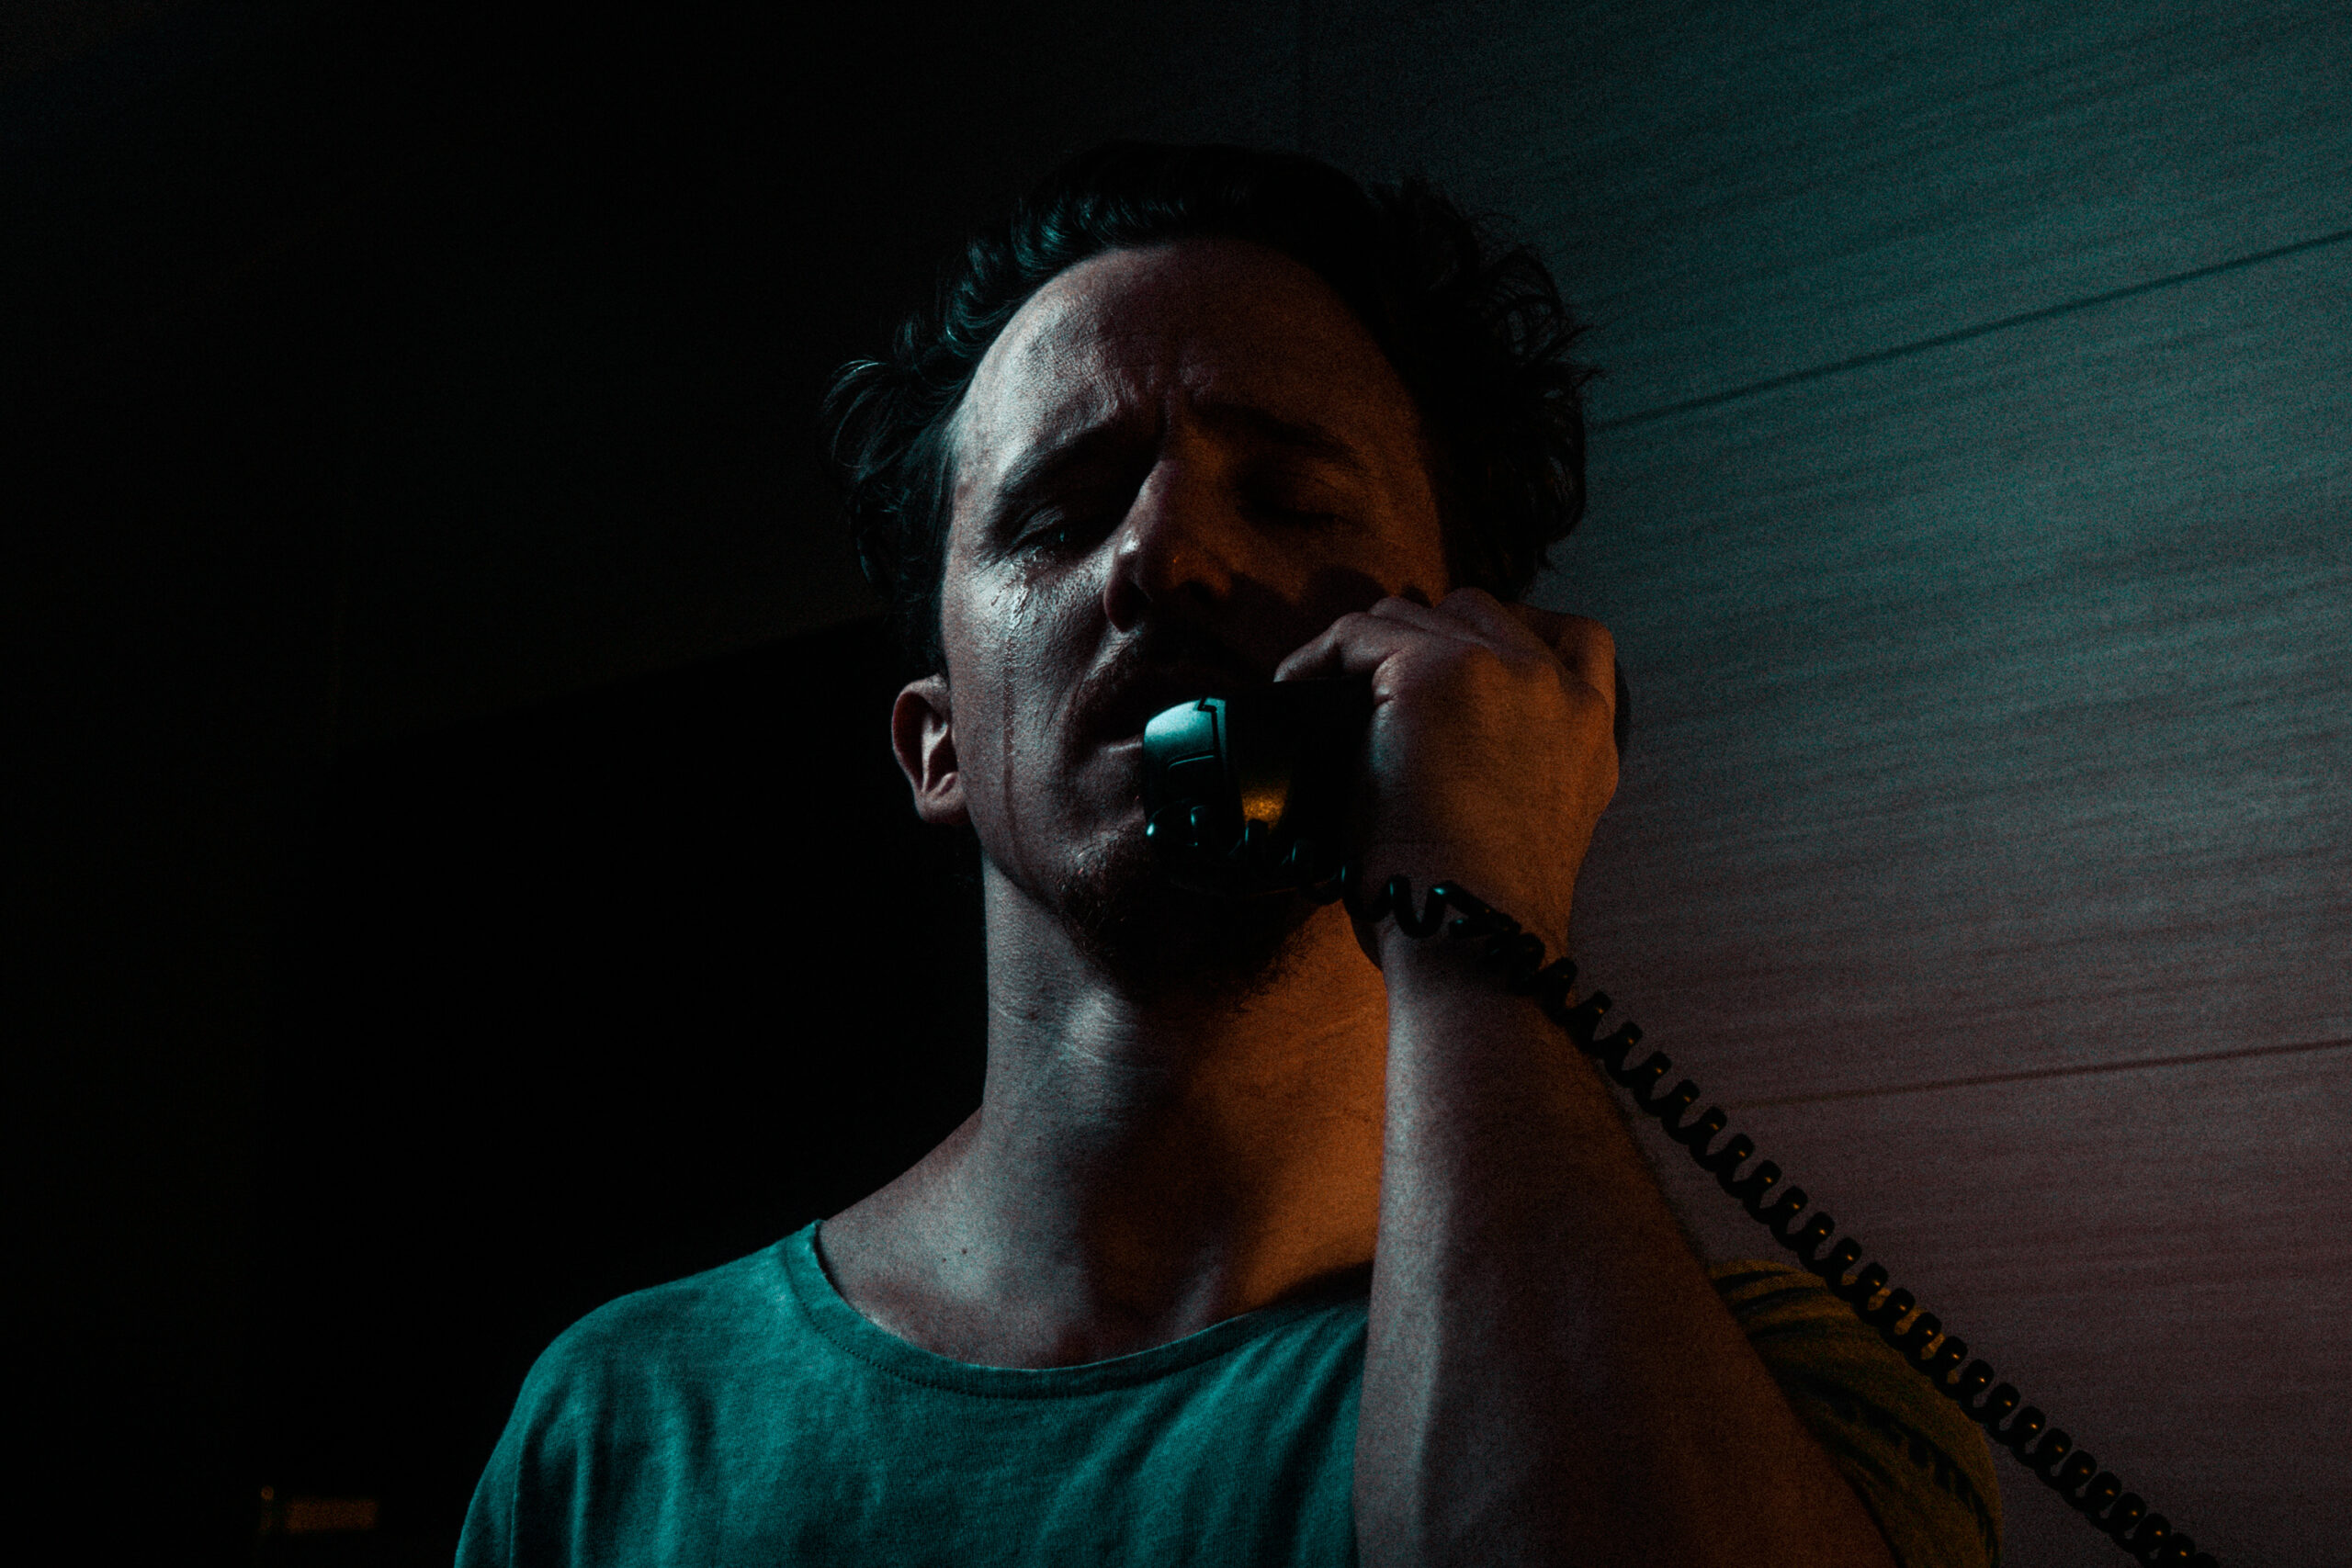 A man stands in darkness with an old-fashioned landline phone against his ear, a single tear running down his cheek.